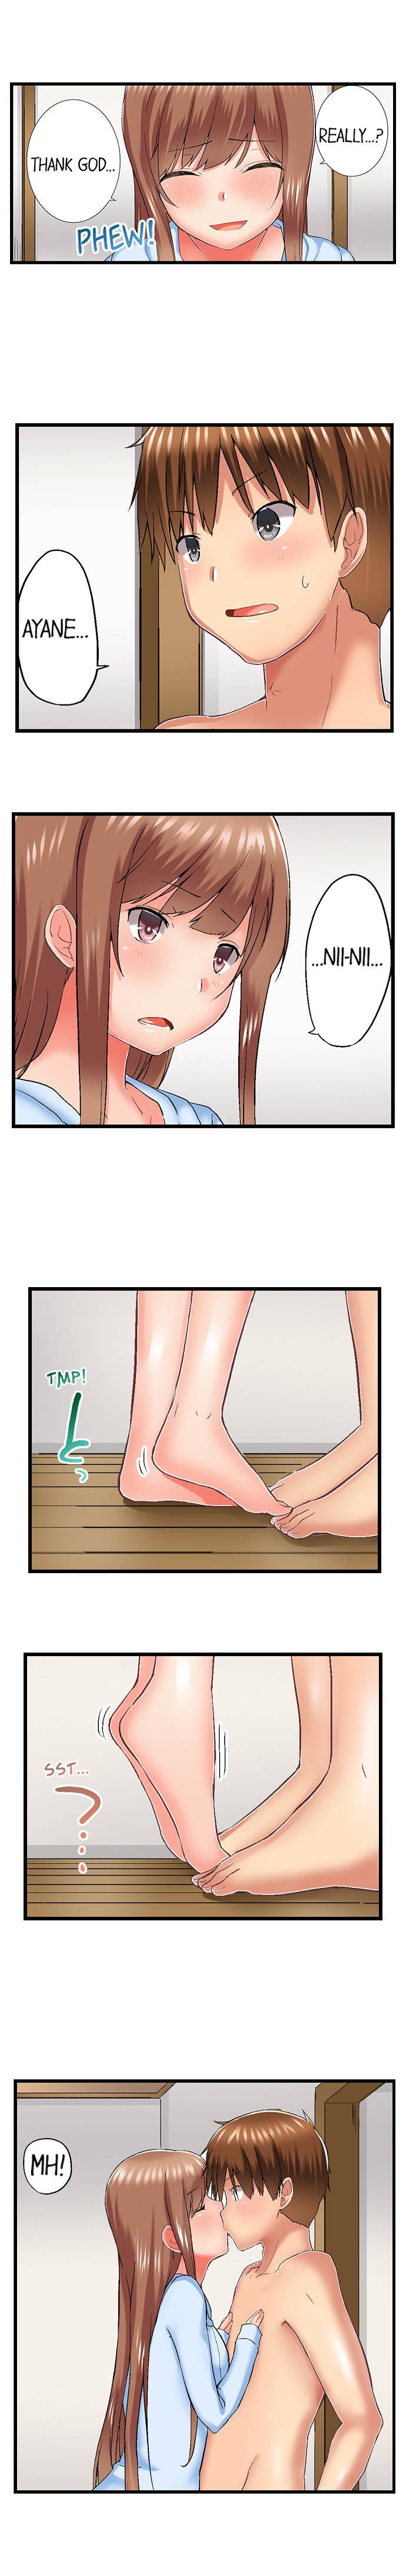 My Brother’s Slipped Inside Me in The Bathtub - Chapter 74 Page 4